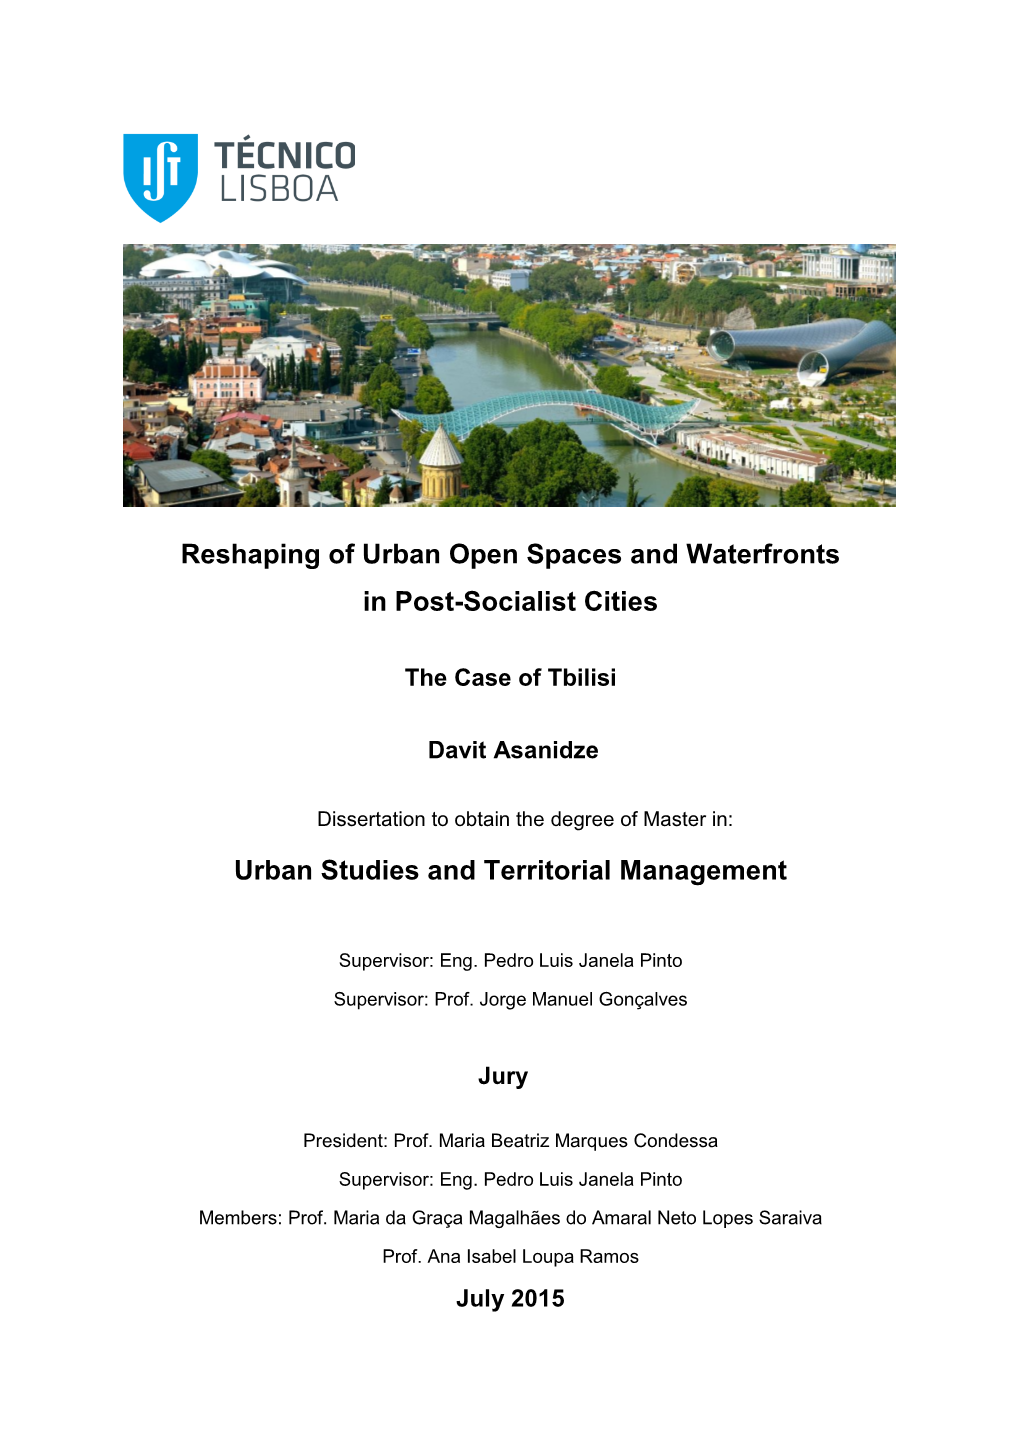 Reshaping of Urban Open Spaces and Waterfronts in Post-Socialist Cities